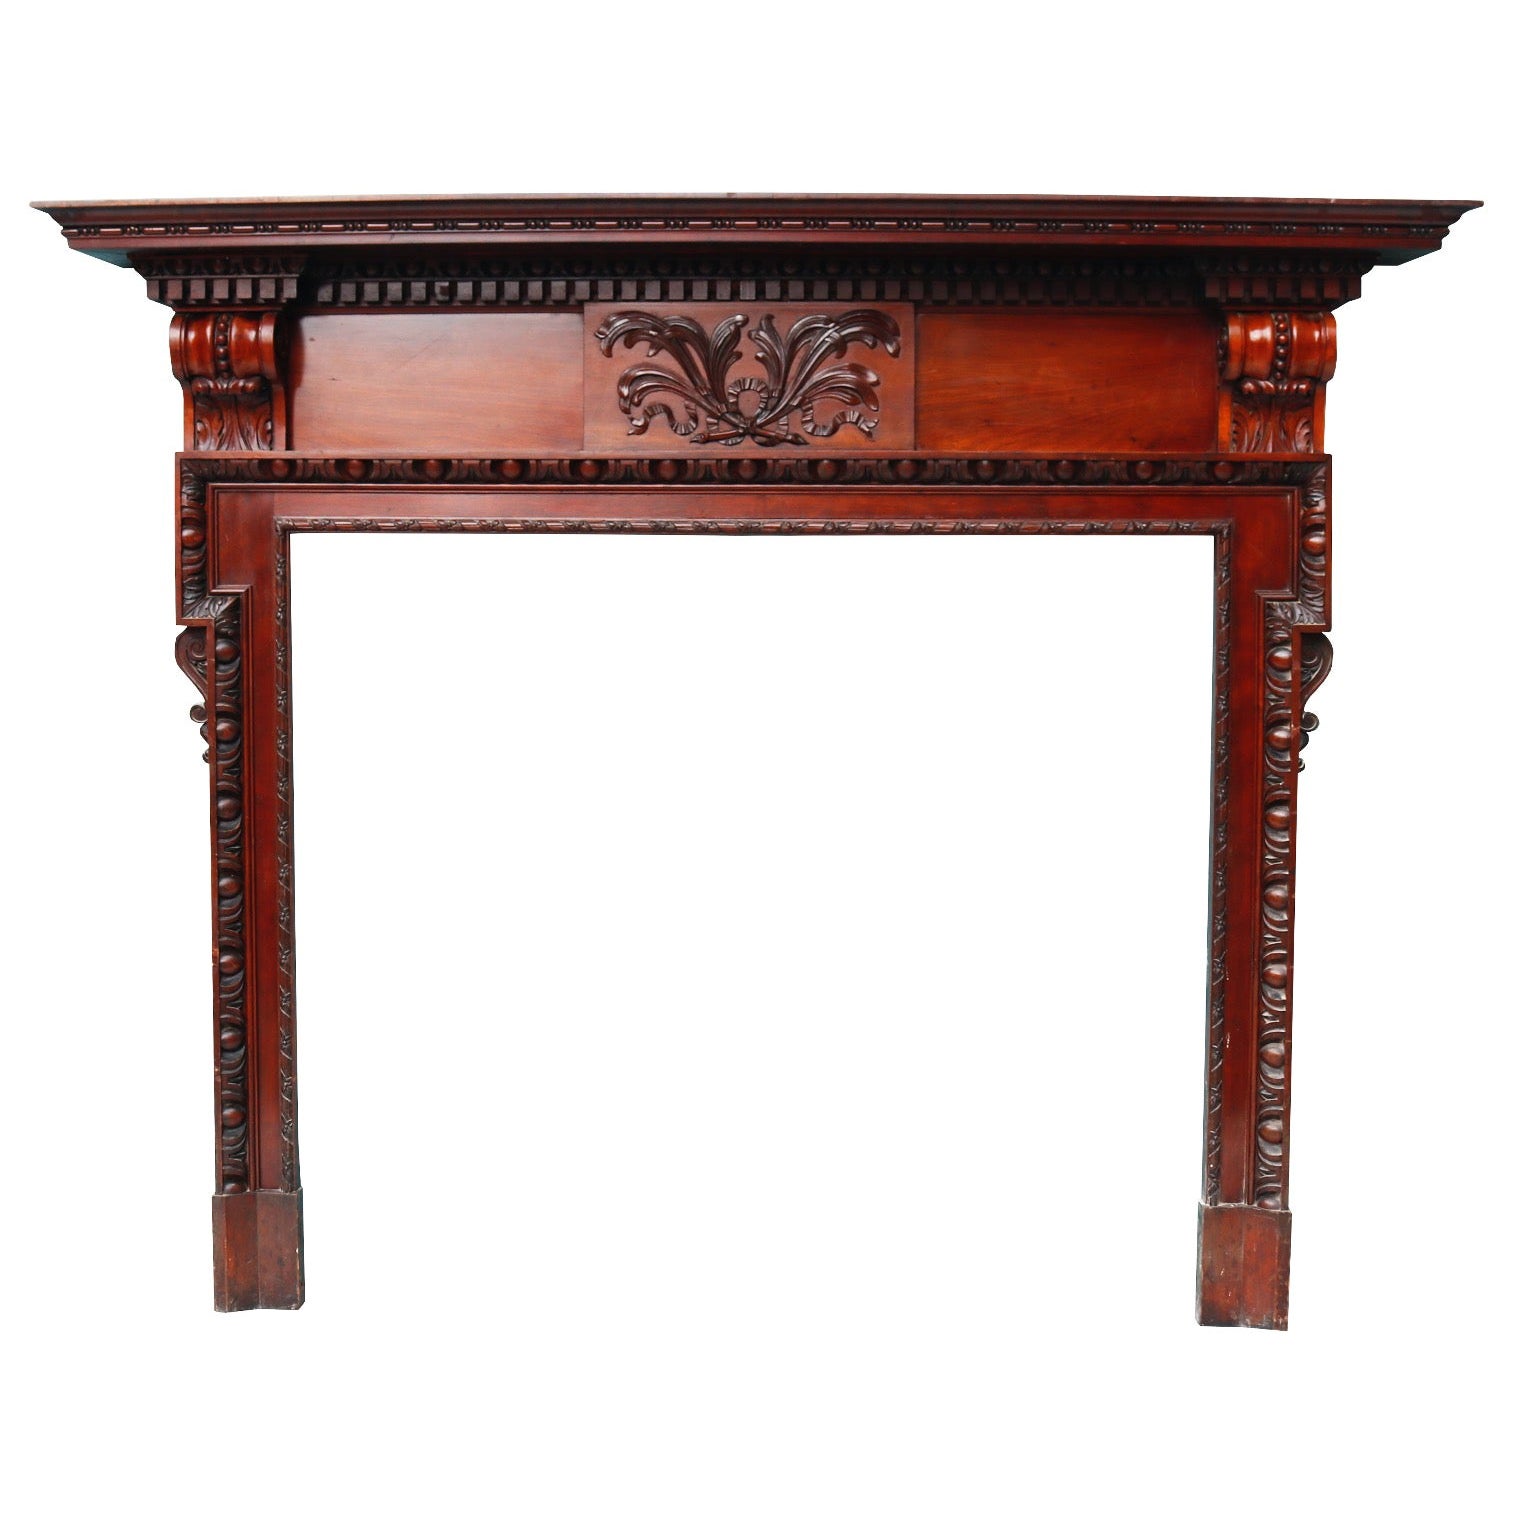 Antique Neoclassical Style Carved Wooden Mantel For Sale